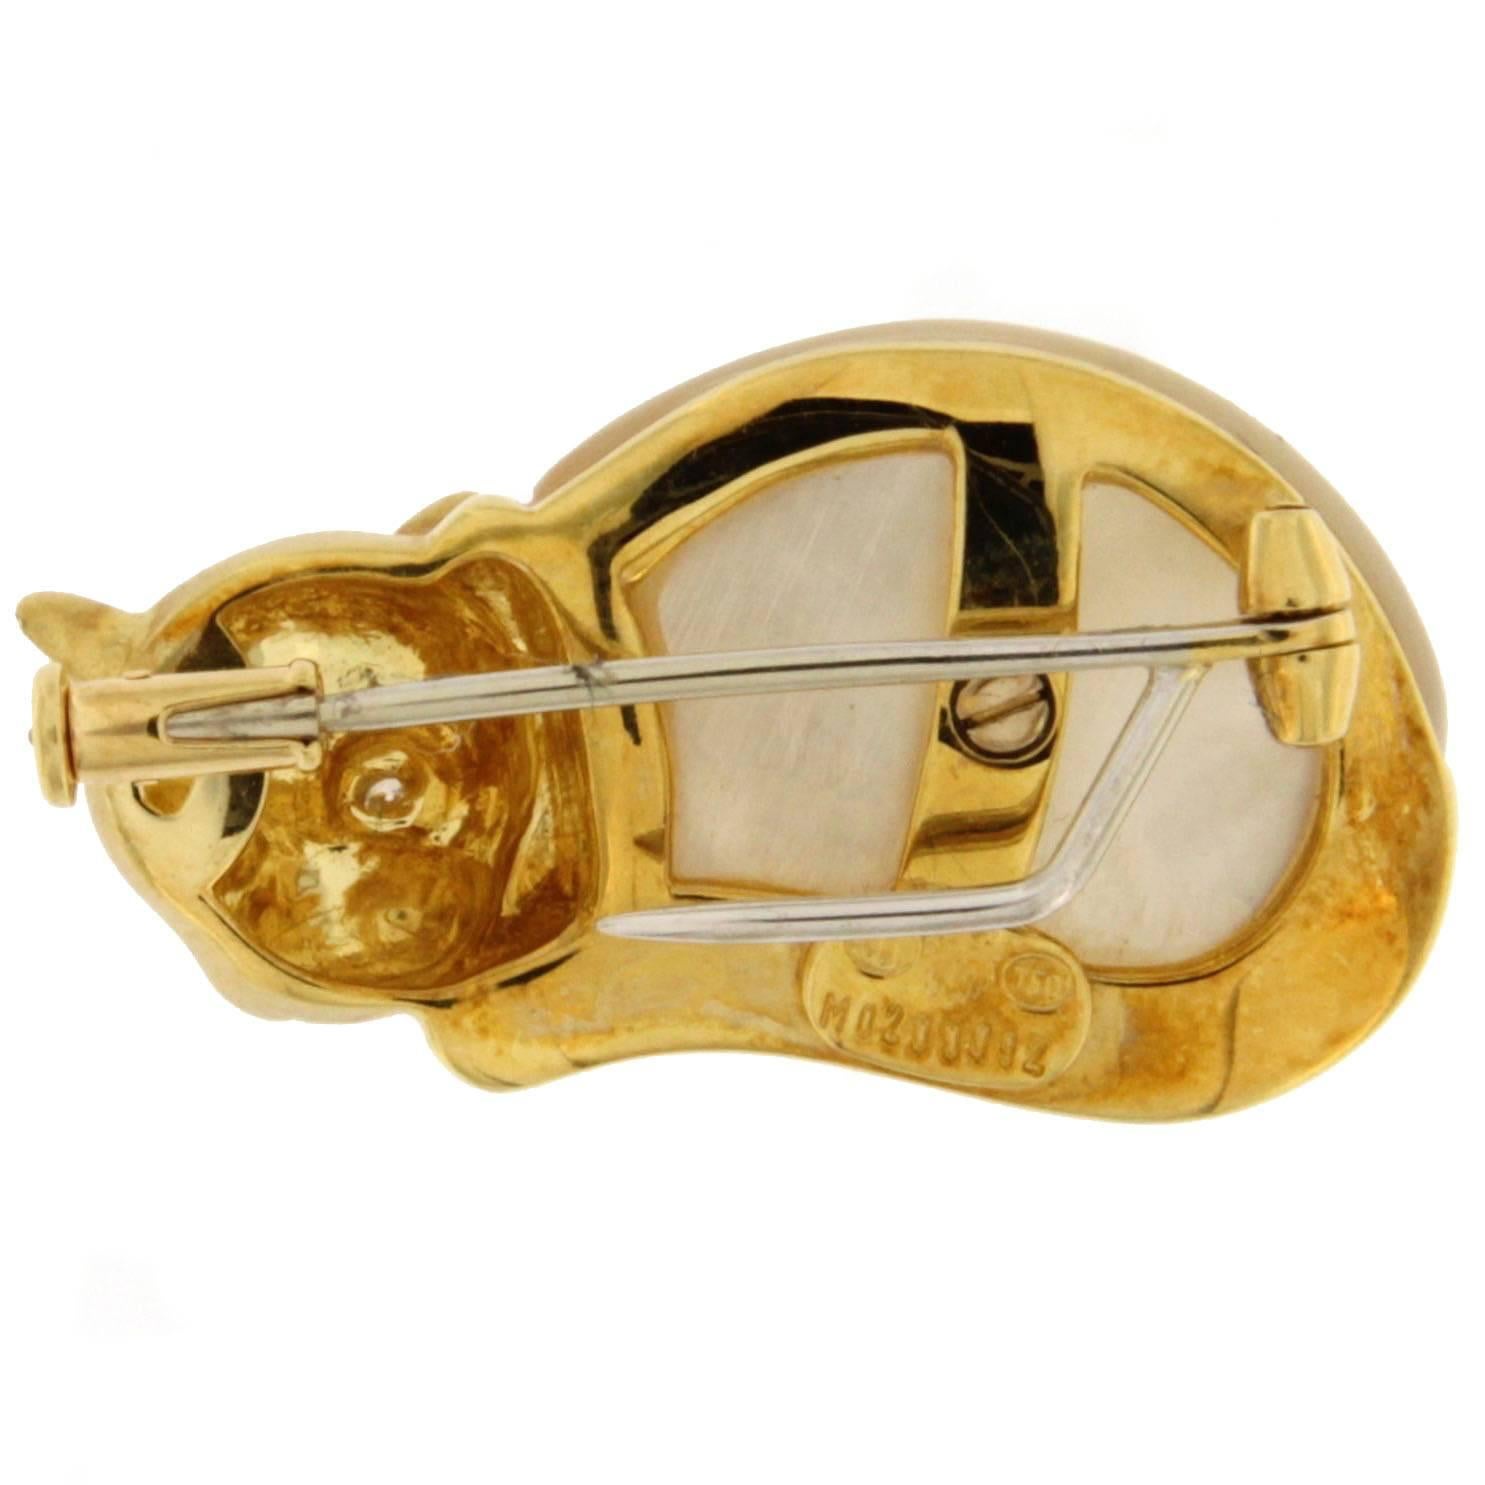 Jona design collection, 18 karat yellow gold cat shaped brooch, set with a mother of pearl body and white diamond eyes.    
All Jona jewelry is new and has never been previously owned or worn. Each item will arrive at your door beautifully gift